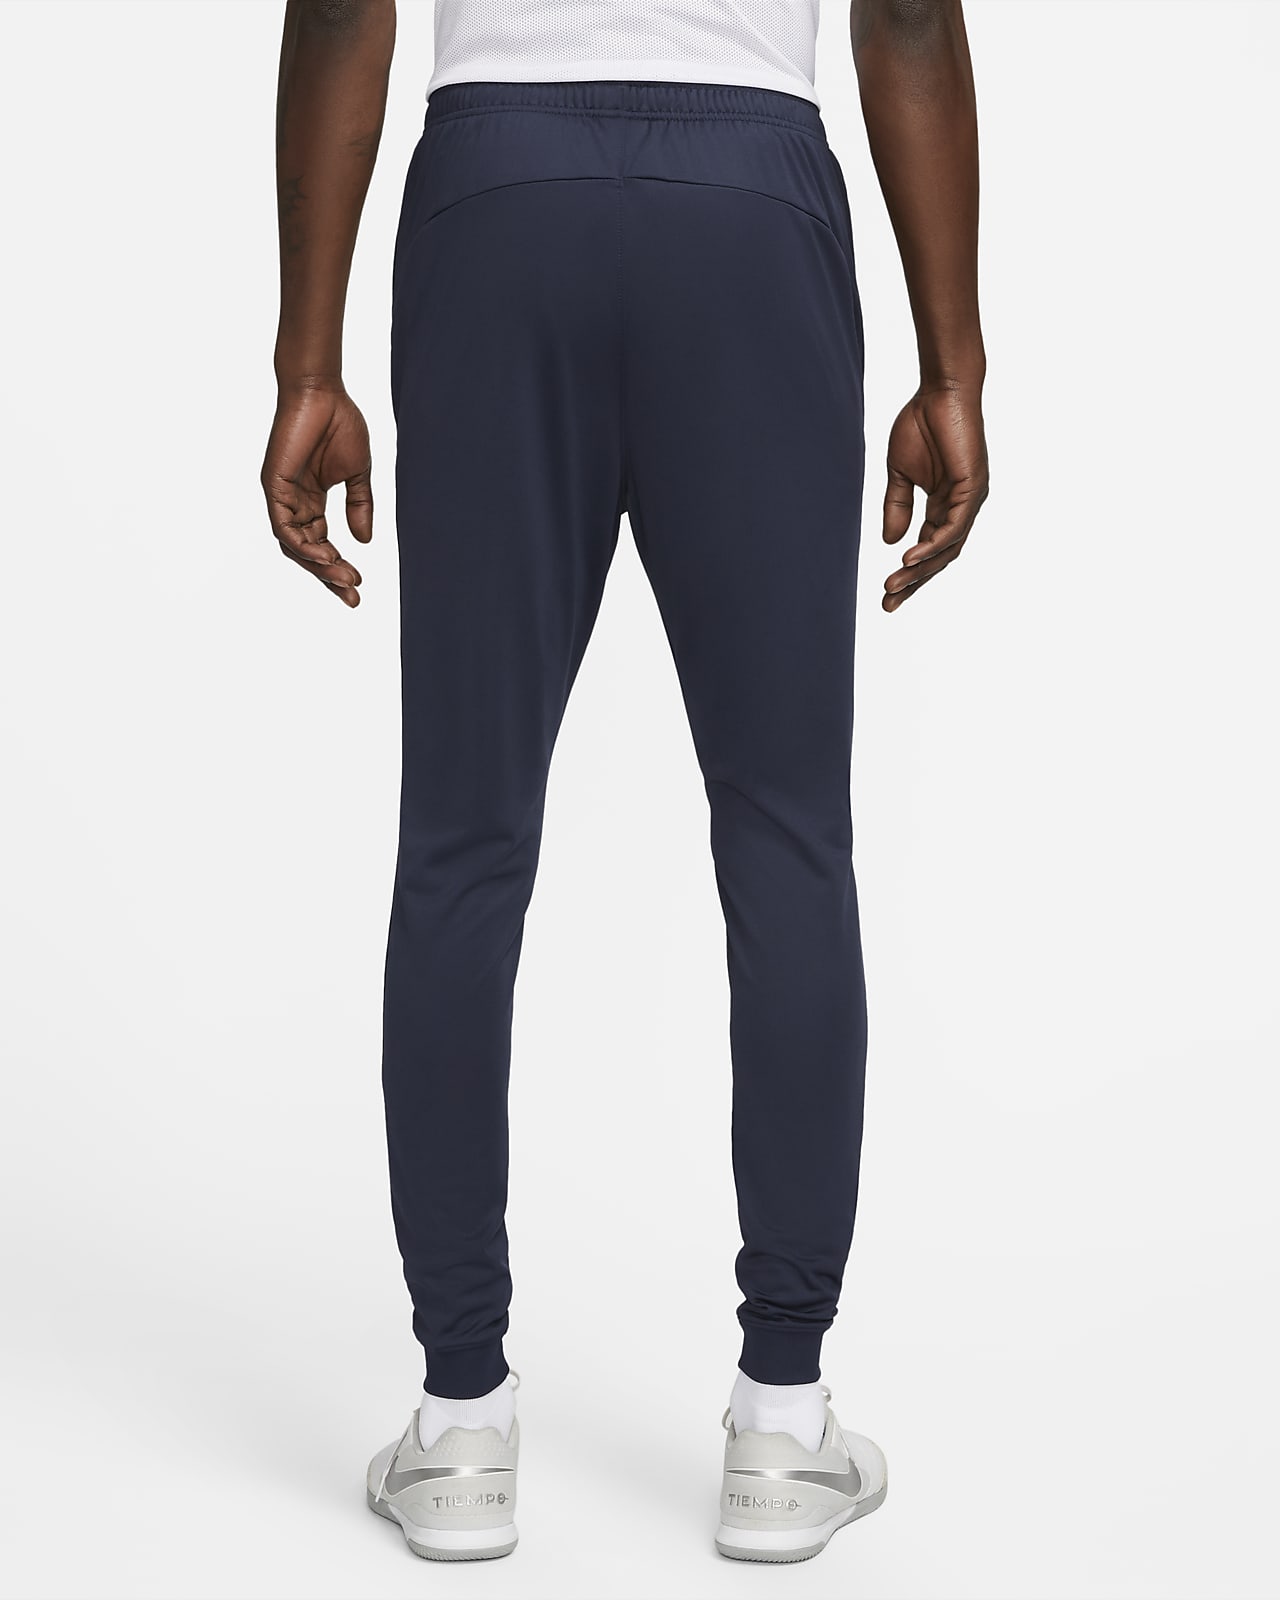 Nike Track Pants & Tracksuits. Find Men's, Women's and Kids' Track Pants  and Joggers in Unique Offers